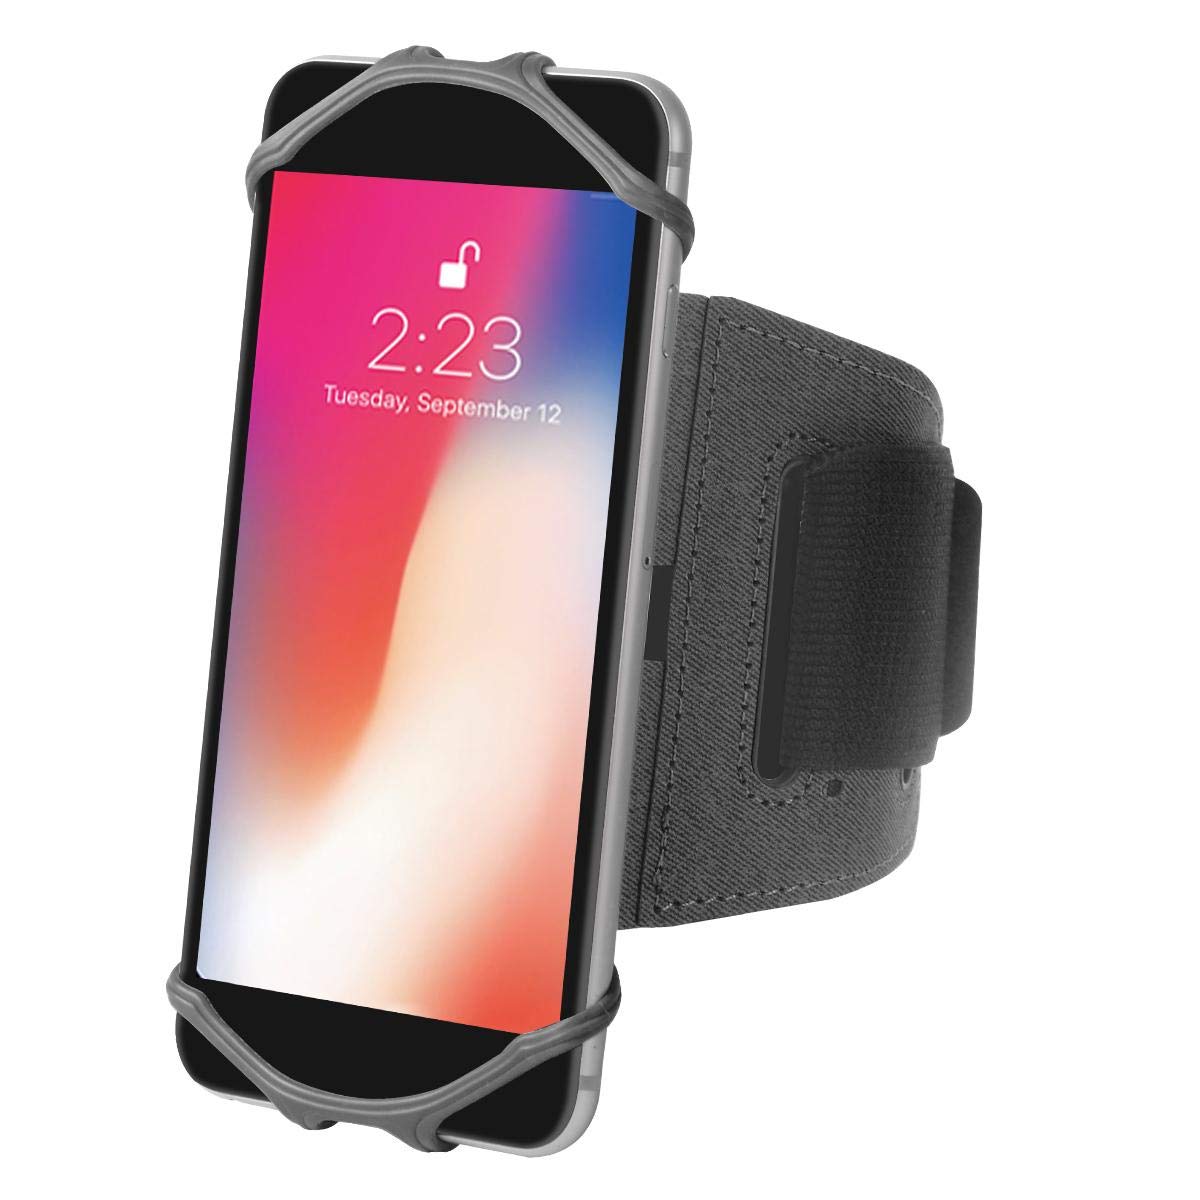 Holster for LG V60 ThinQ 5G (Holster by BoxWave) - ActiveStretch Sport Armband, Adjustable Armband for Workout and Running for LG V60 ThinQ 5G - Jet Black